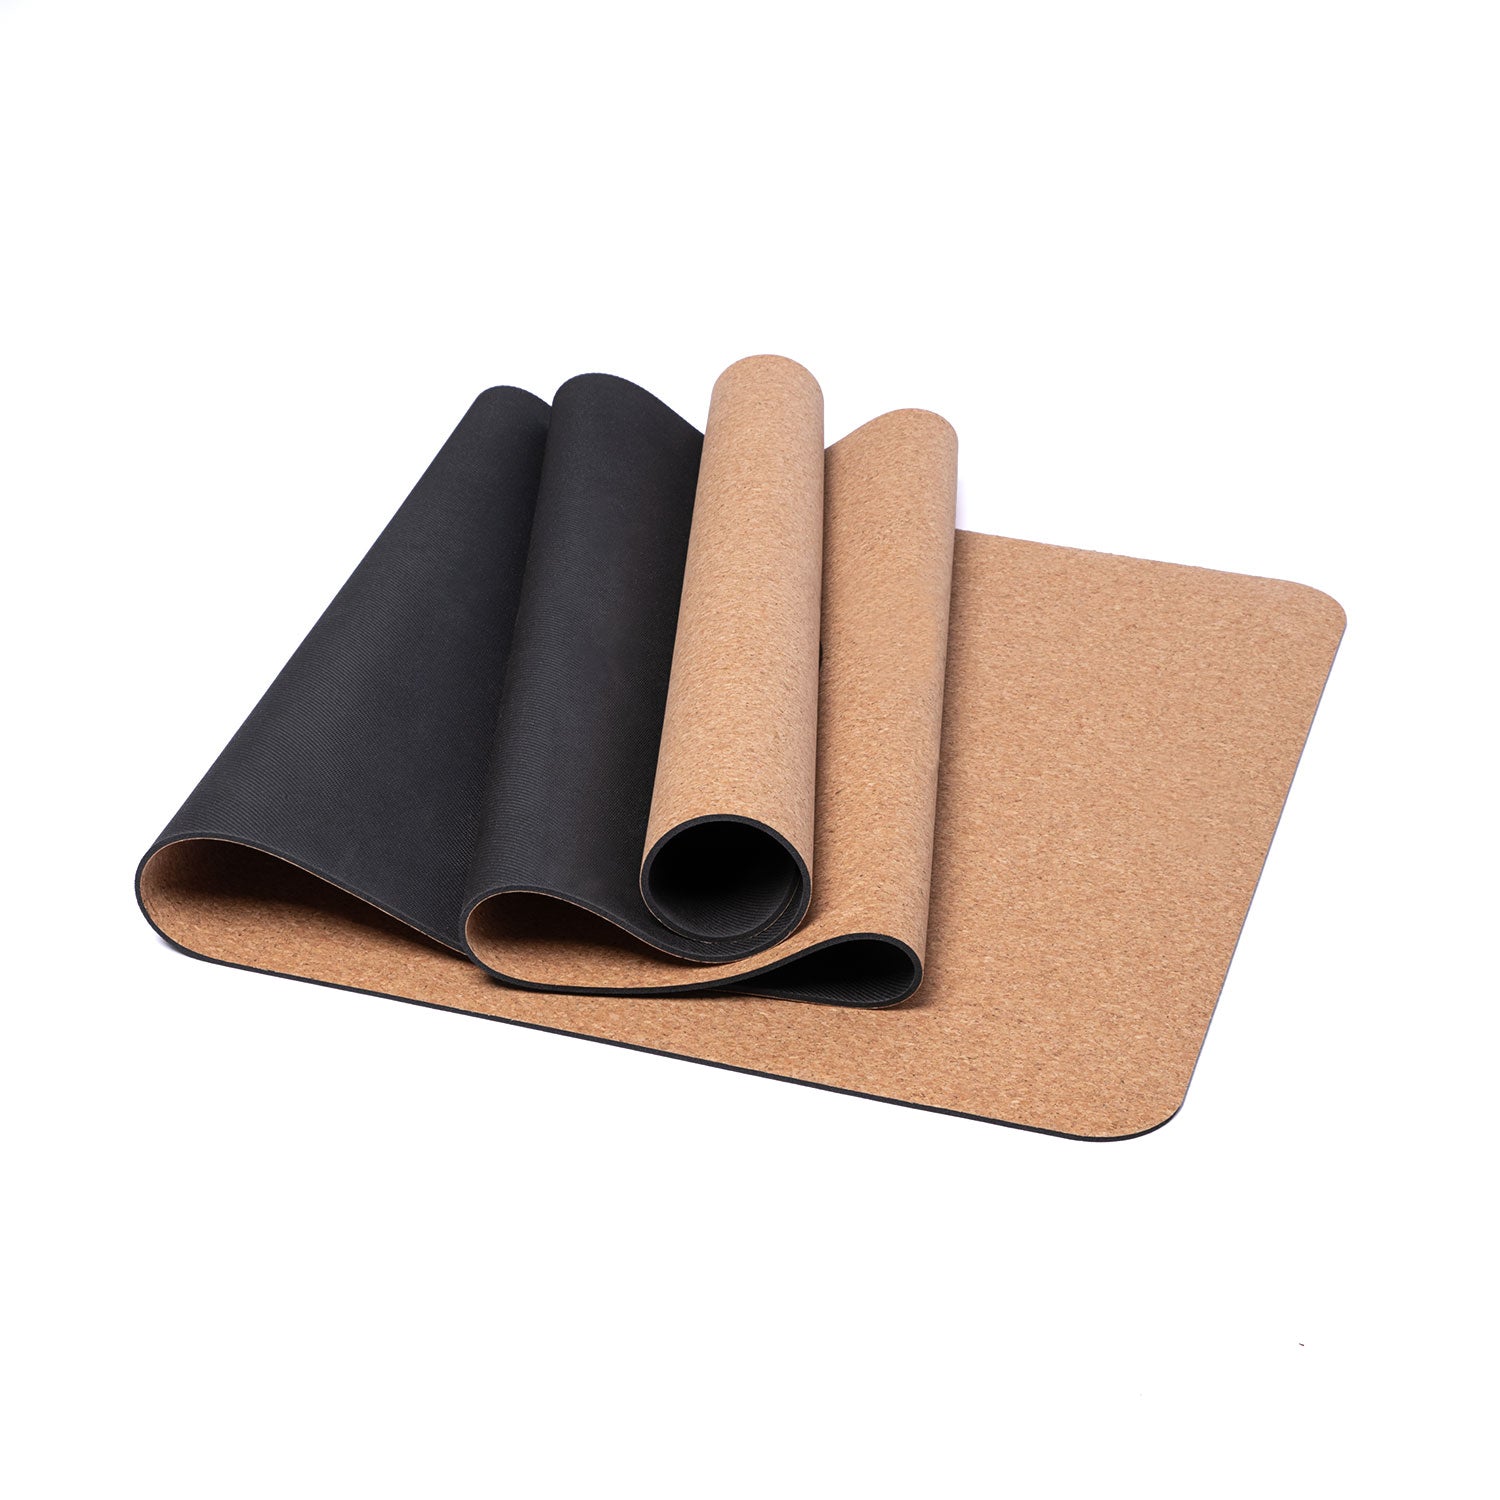 Buy Sustainable Cork and Natural Rubber Yoga Mat